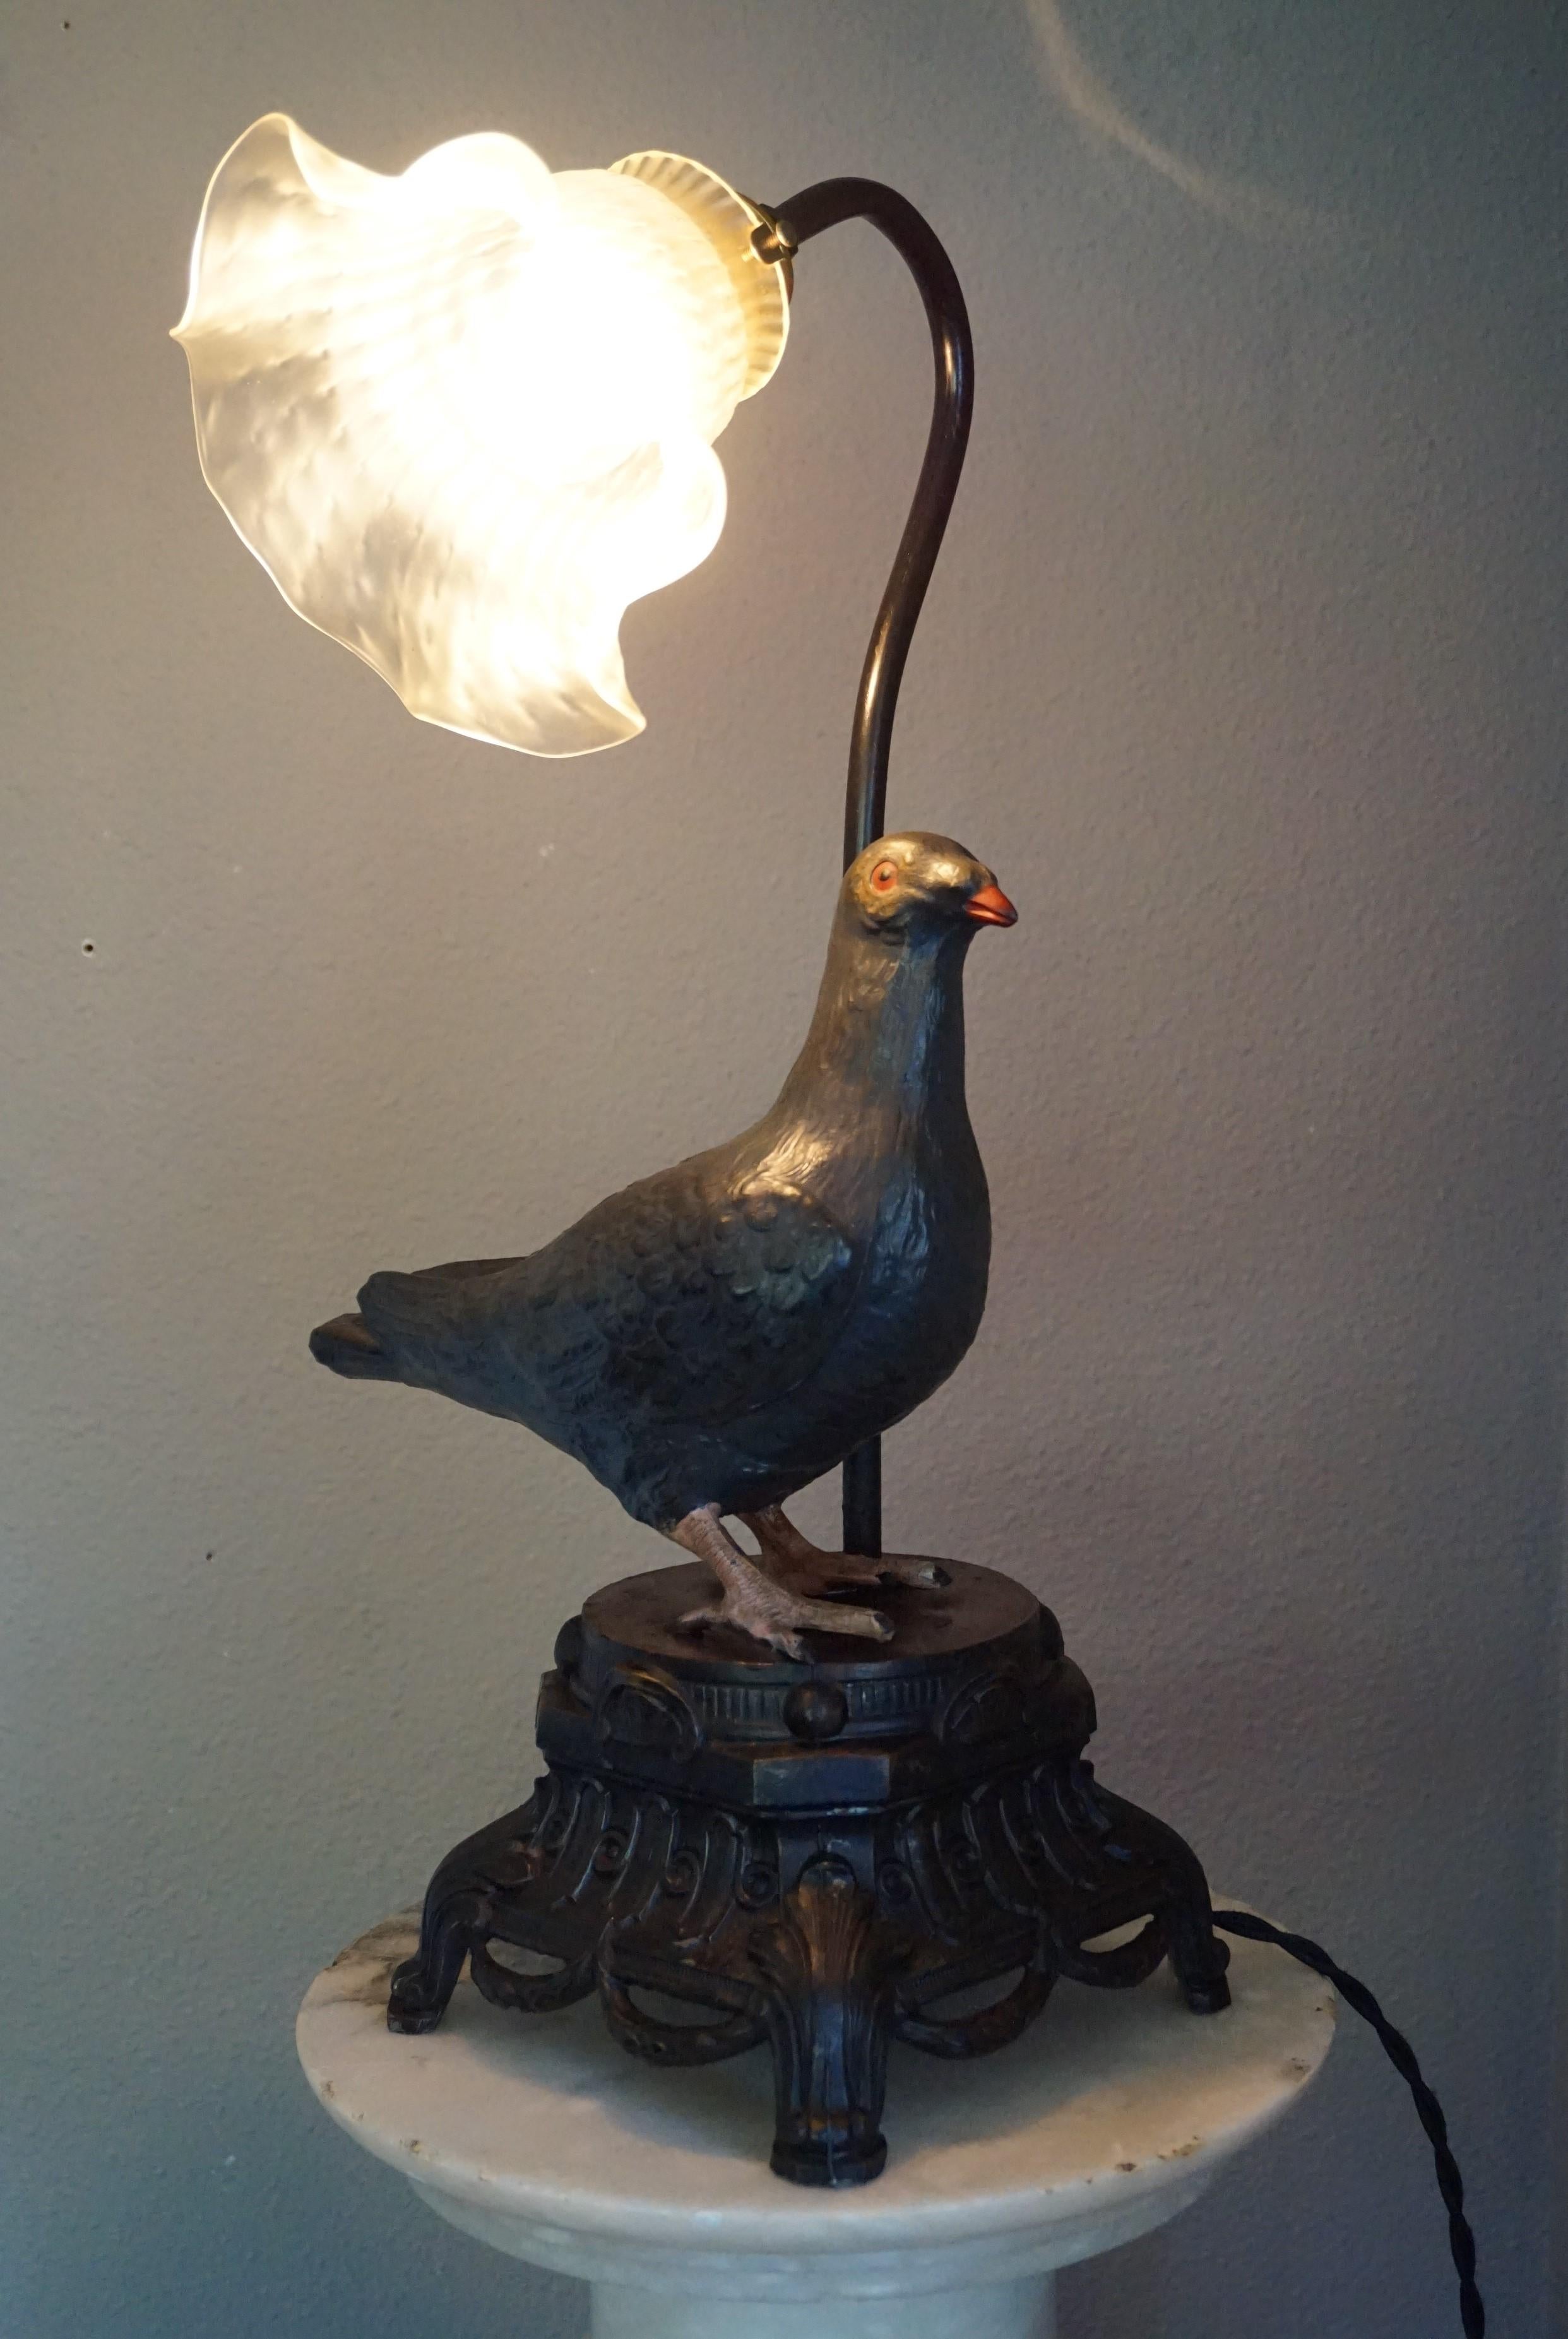 Rare and hand-painted table lamp with a deeper meaning.

In centuries past many home accessories for the 'well to do' were made with difficult and time consuming techniques and very often they had a deeper meaning. Internationally doves are symbols